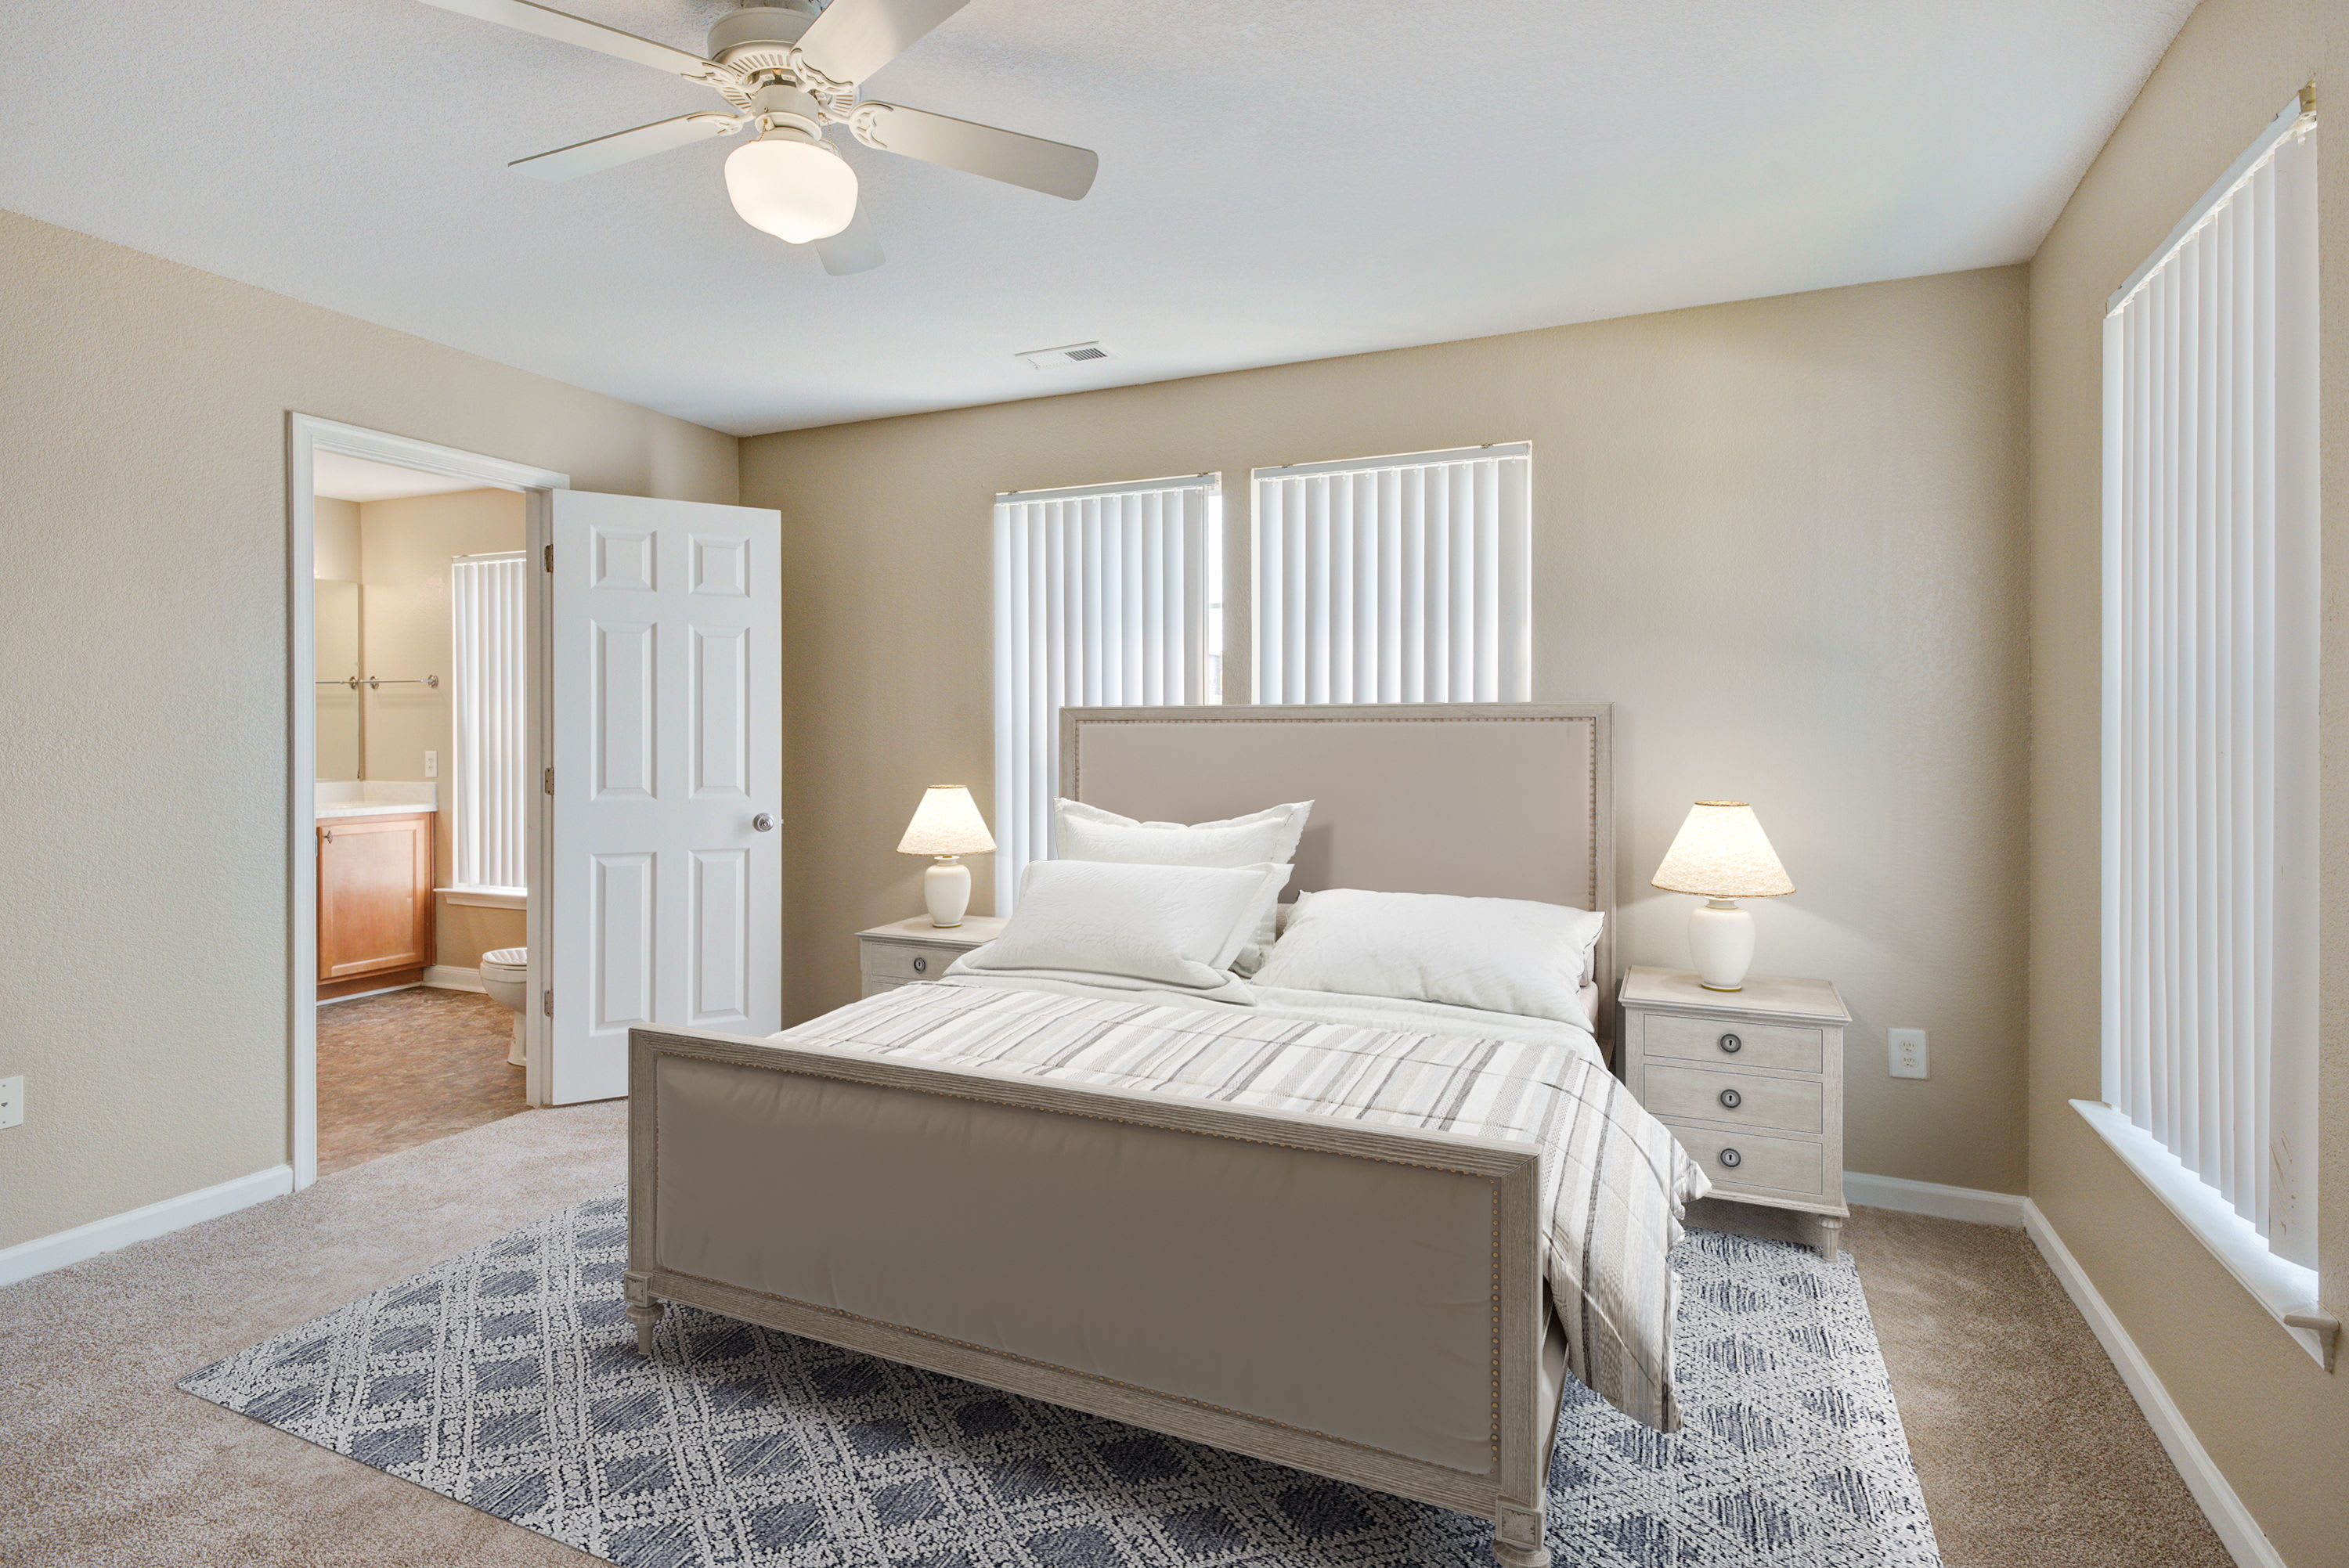 A furnished main bedroom in a home at The Village at Whitehurst Farm in Norfolk, Virginia